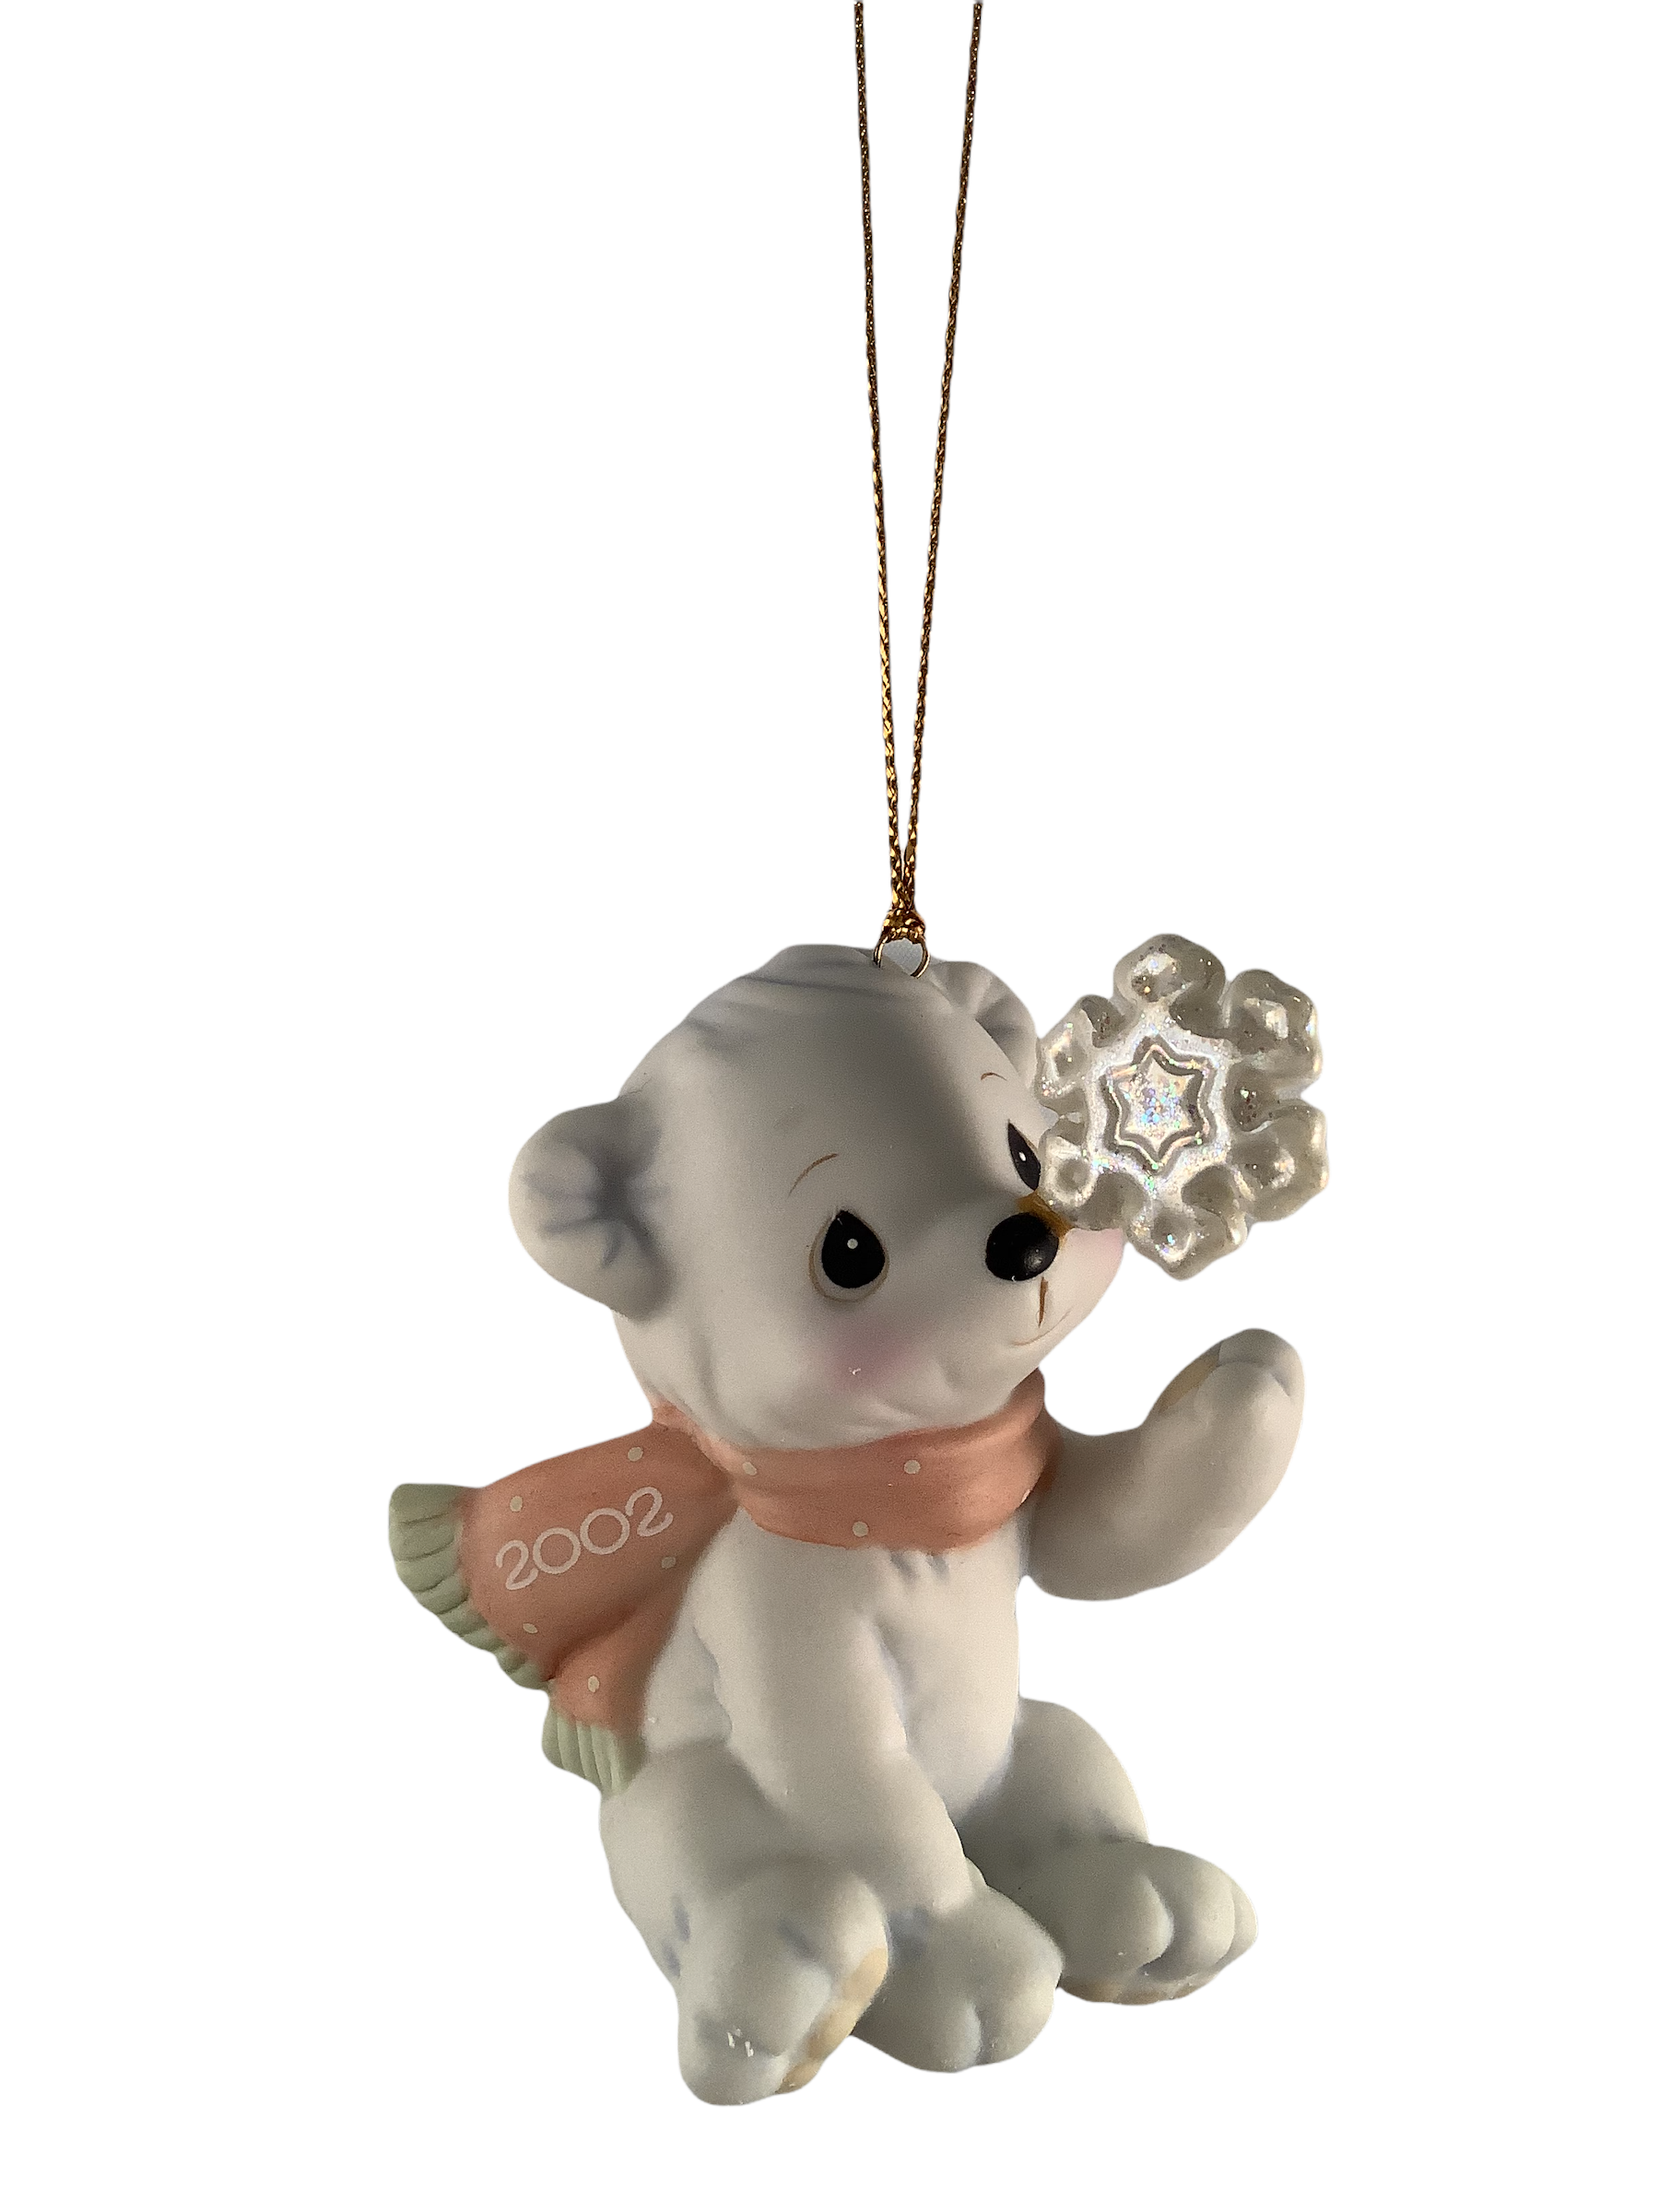 There's Sno One Like You - Precious Moment Ornament